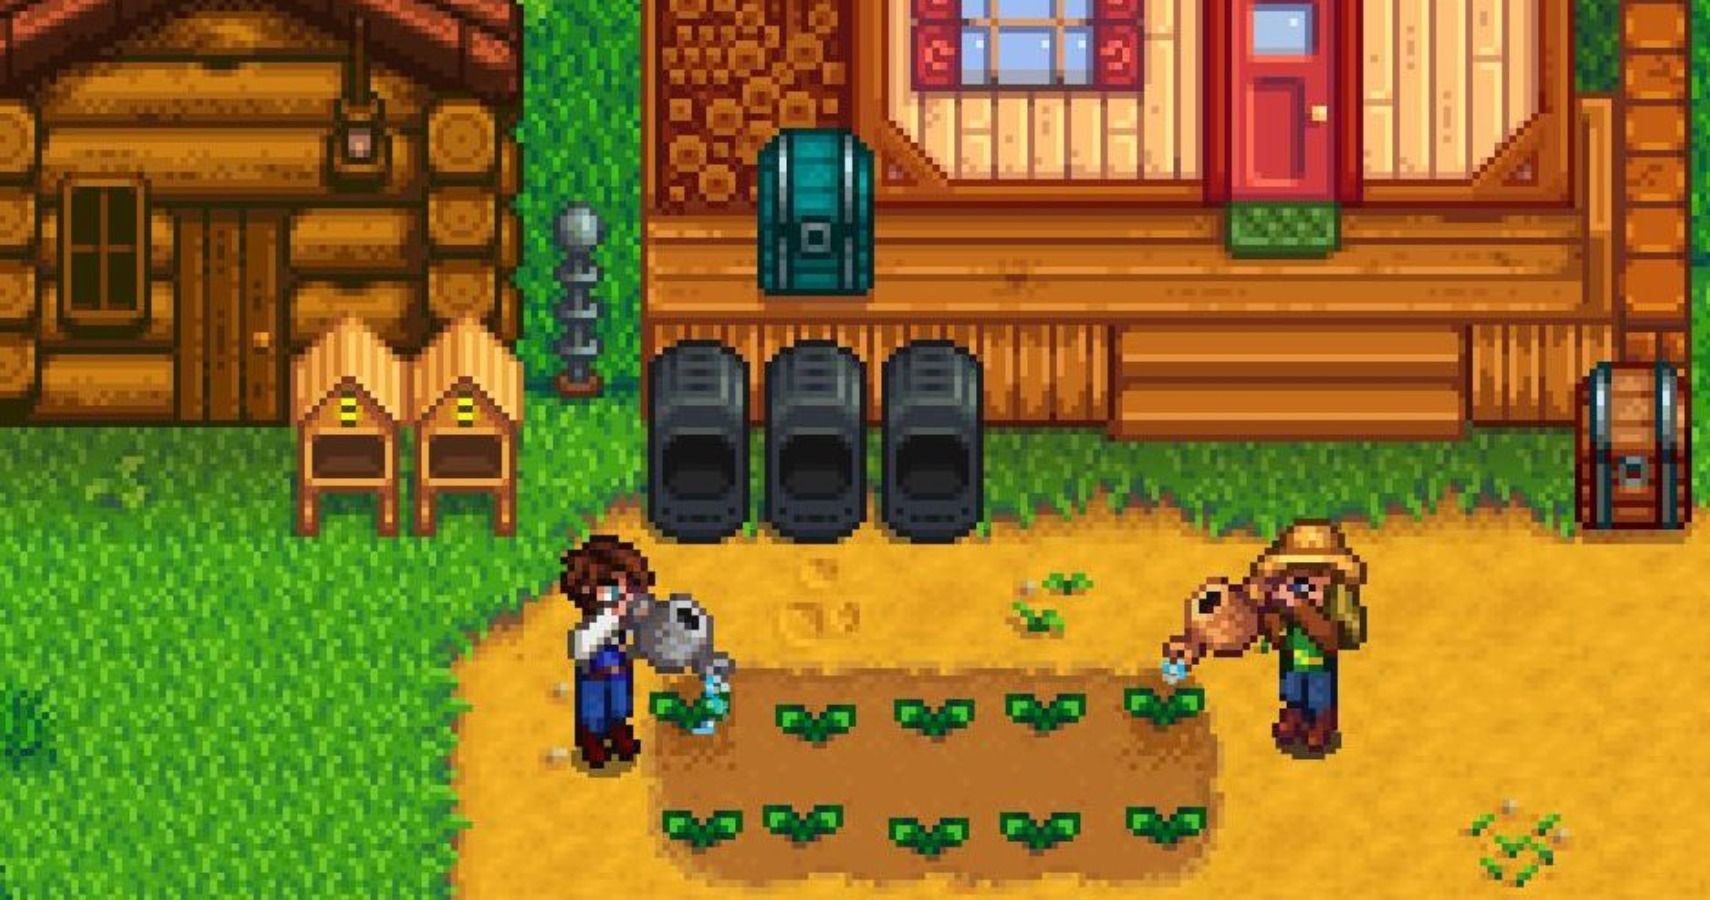 Look for multiplayer Stardew Valley on Switch this week - OpenCritic